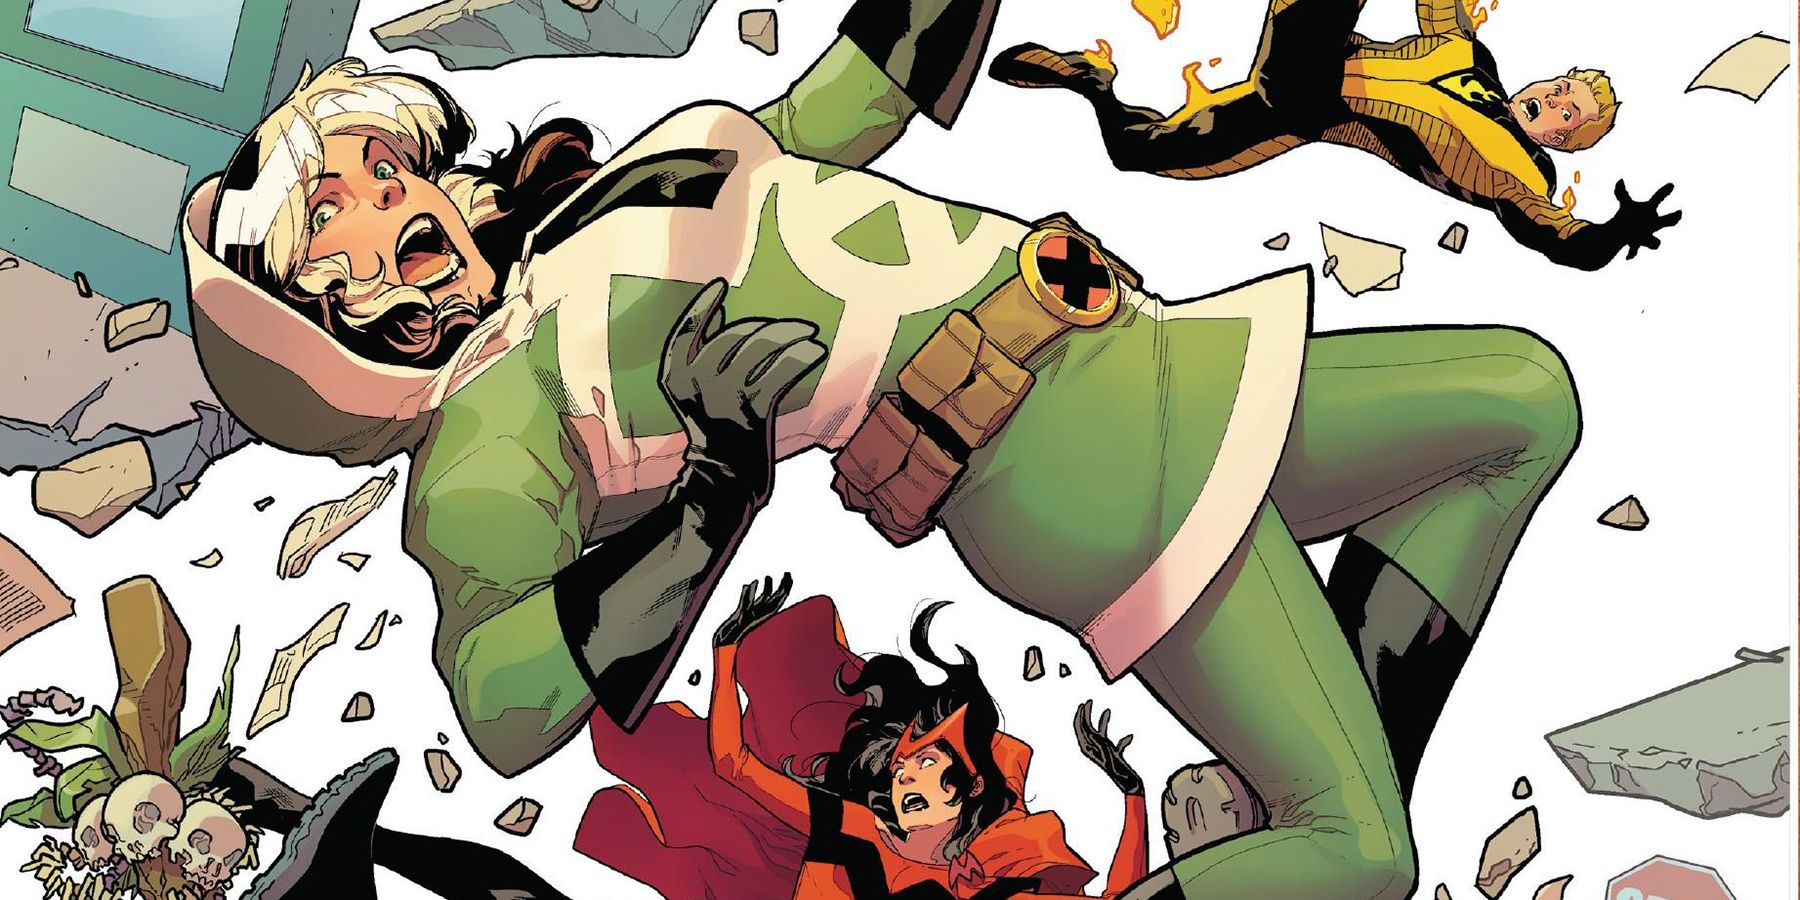 Rogue on the cover of Uncanny Avengers